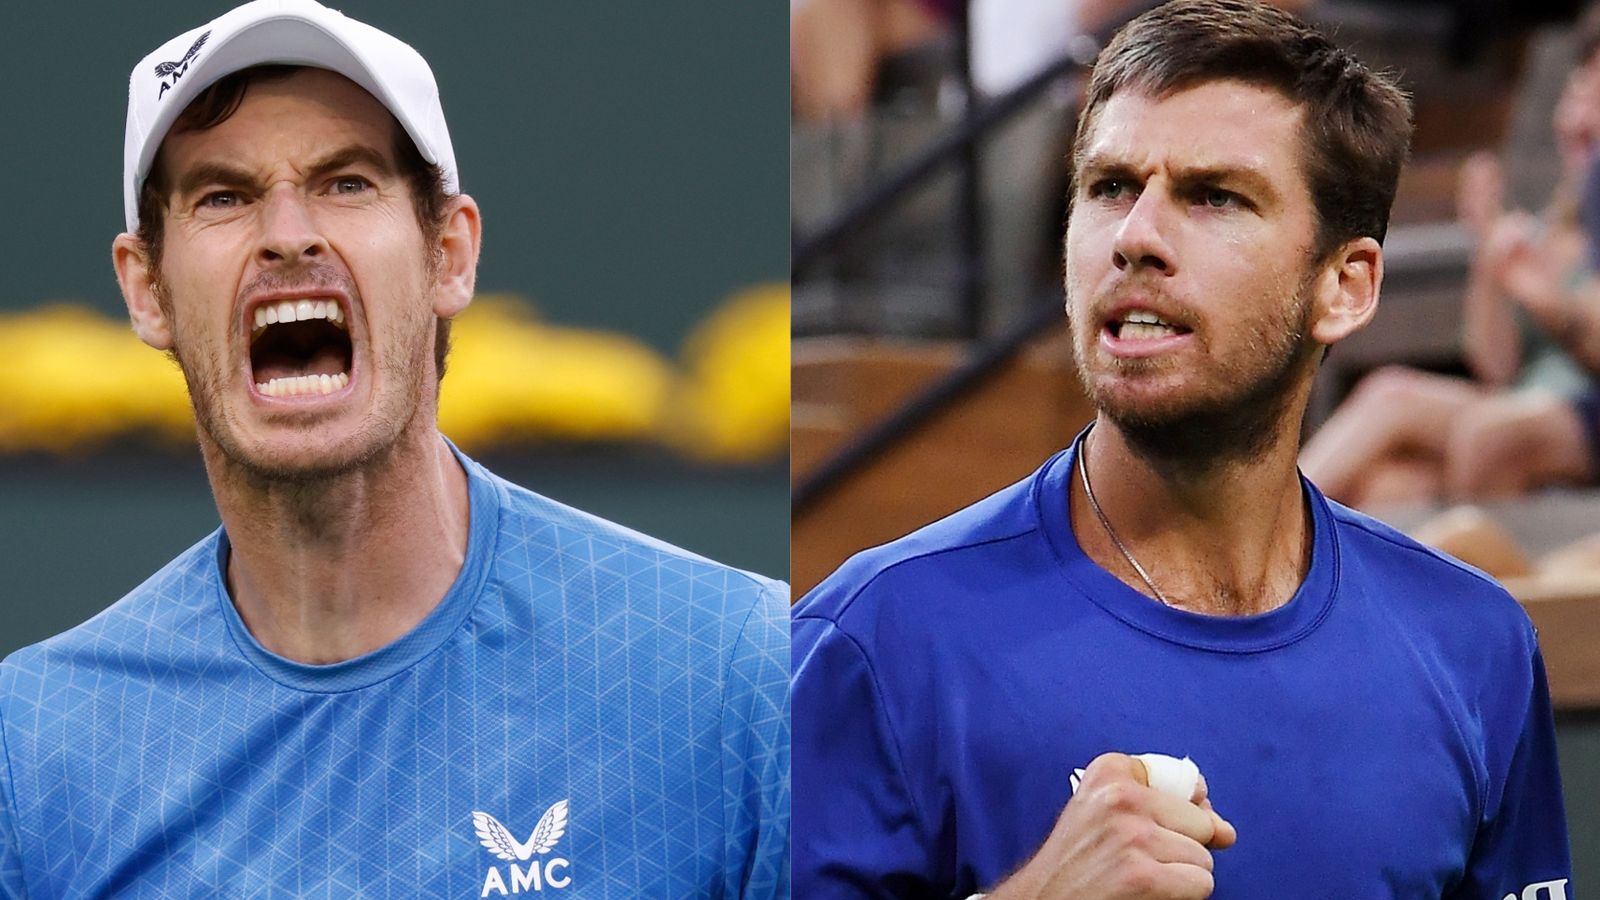 Andy Murray takes on fellow Brit Cameron Norrie at the Western & Southern Open in Cincinnati with Emma Raducanu to come